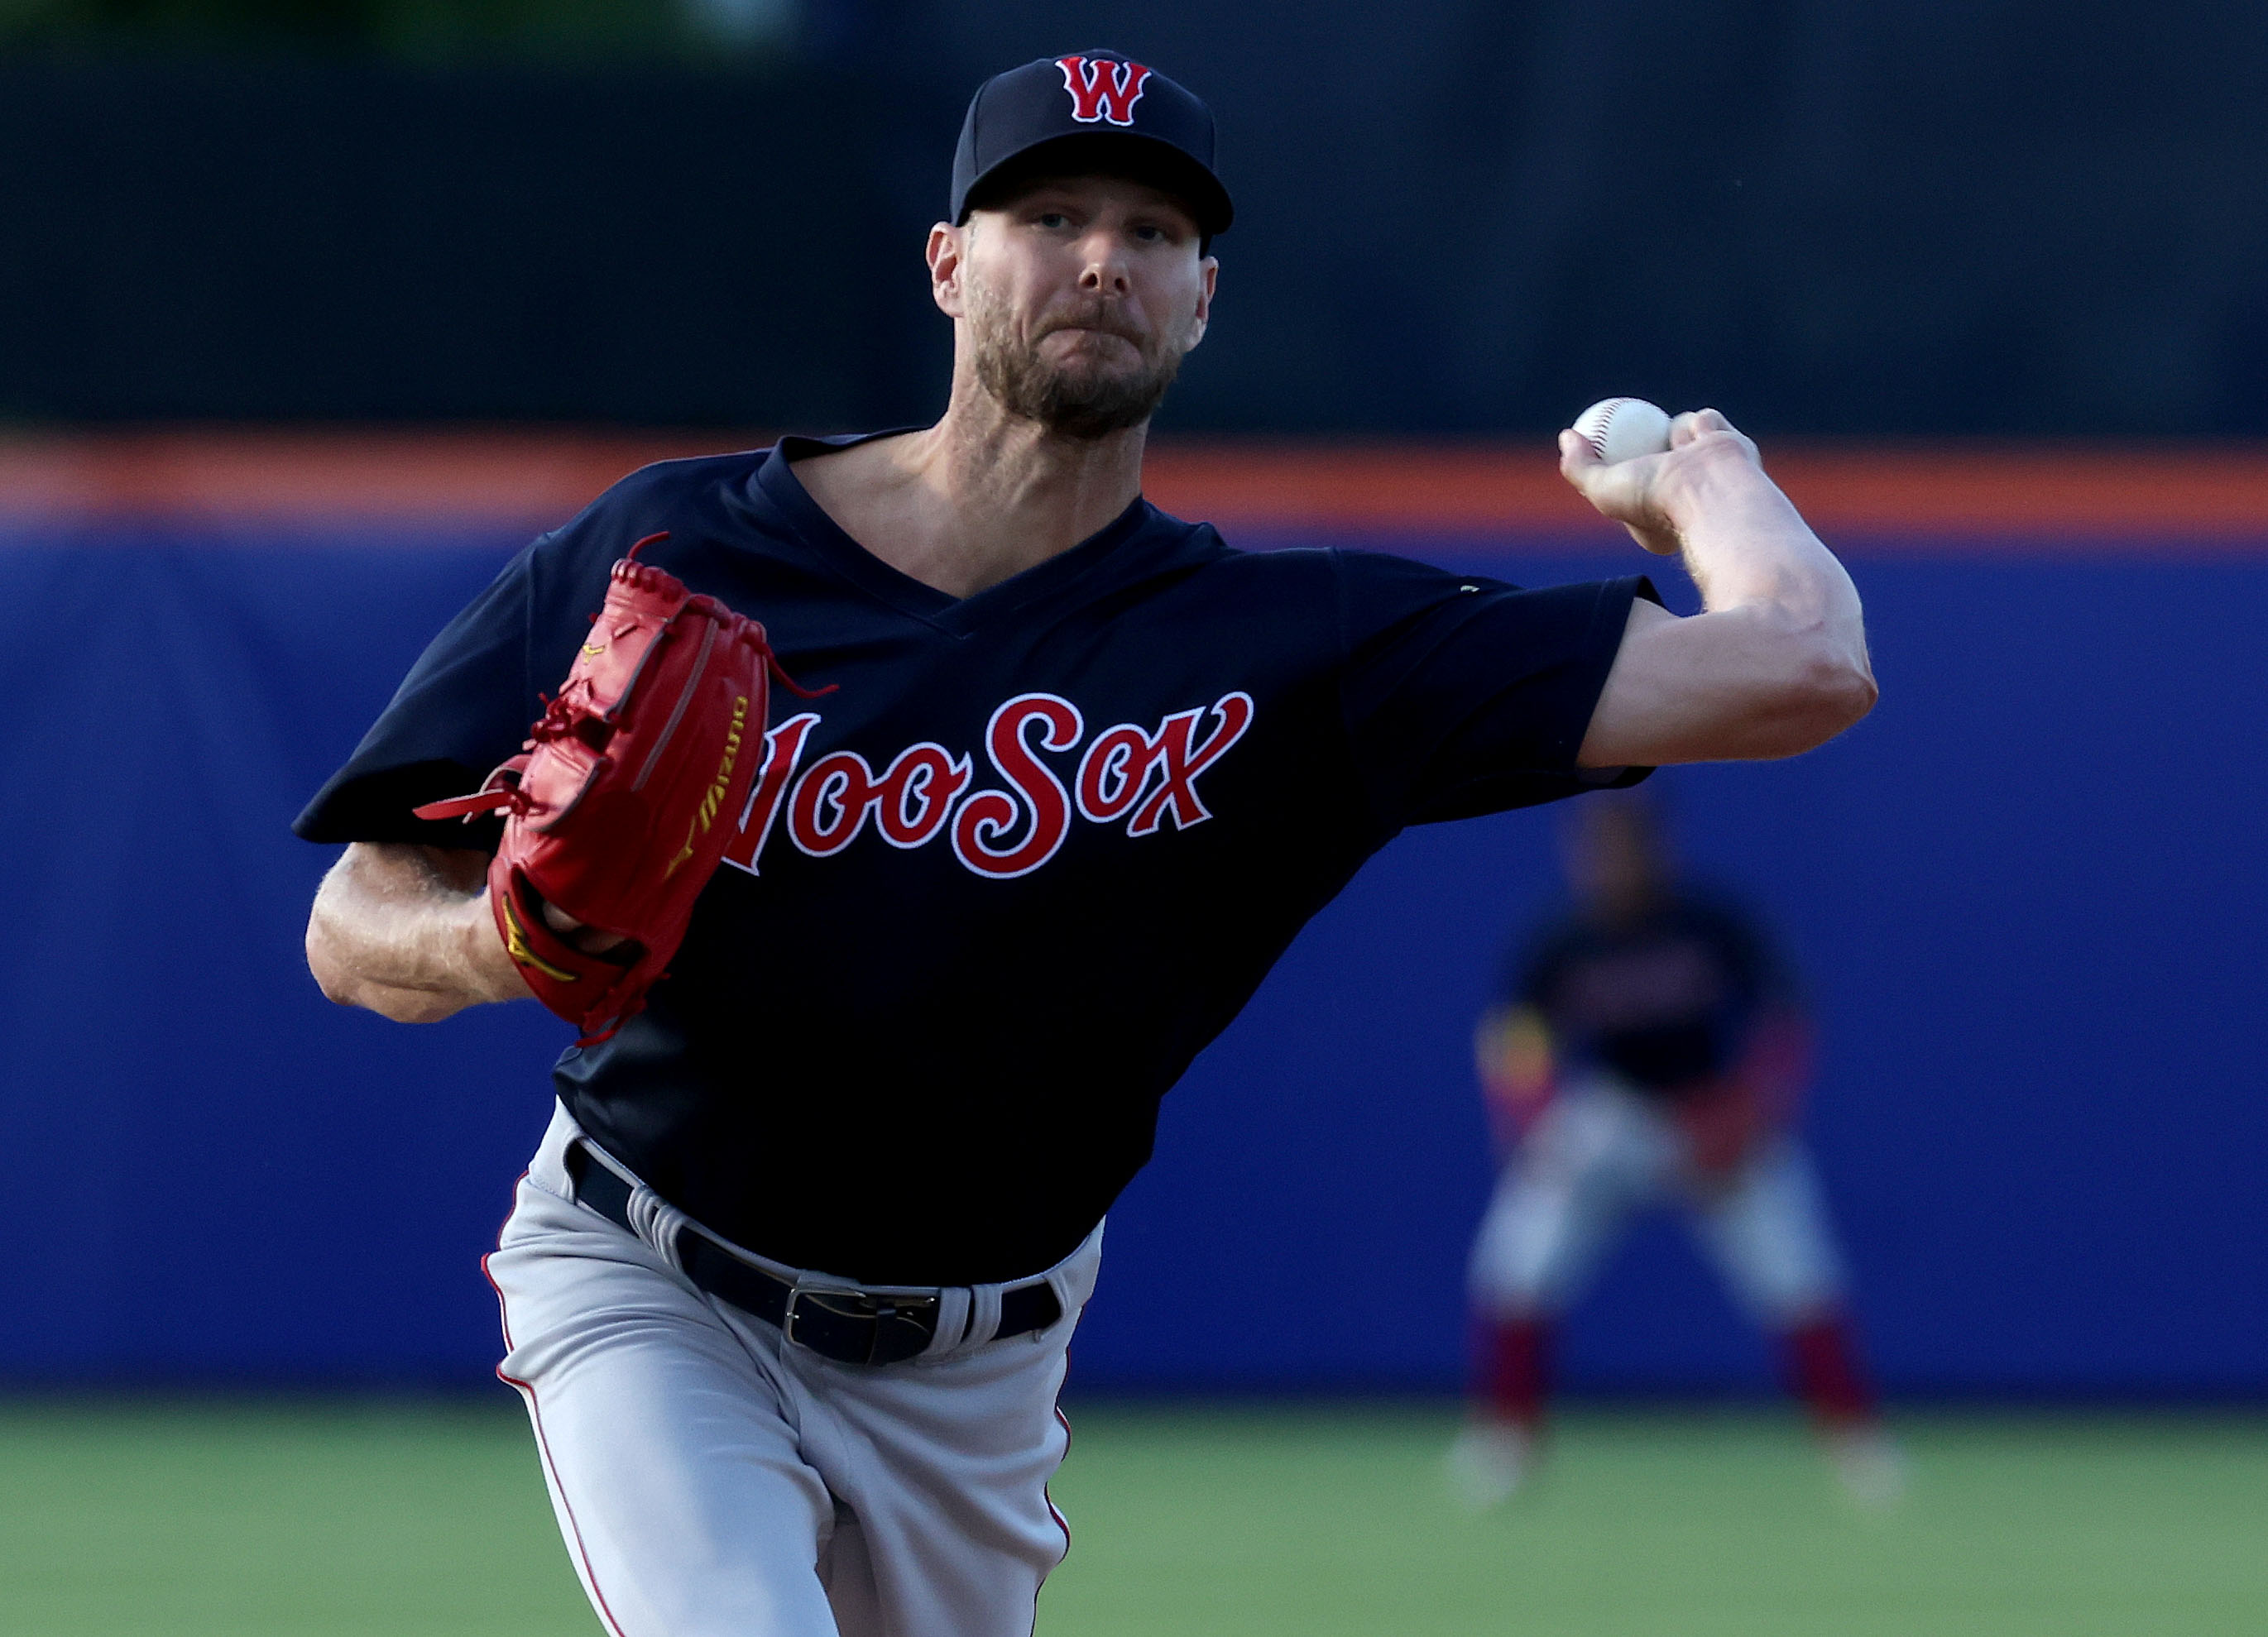 Chris Sale retires 1st 14 batters in return from injury, Red Sox